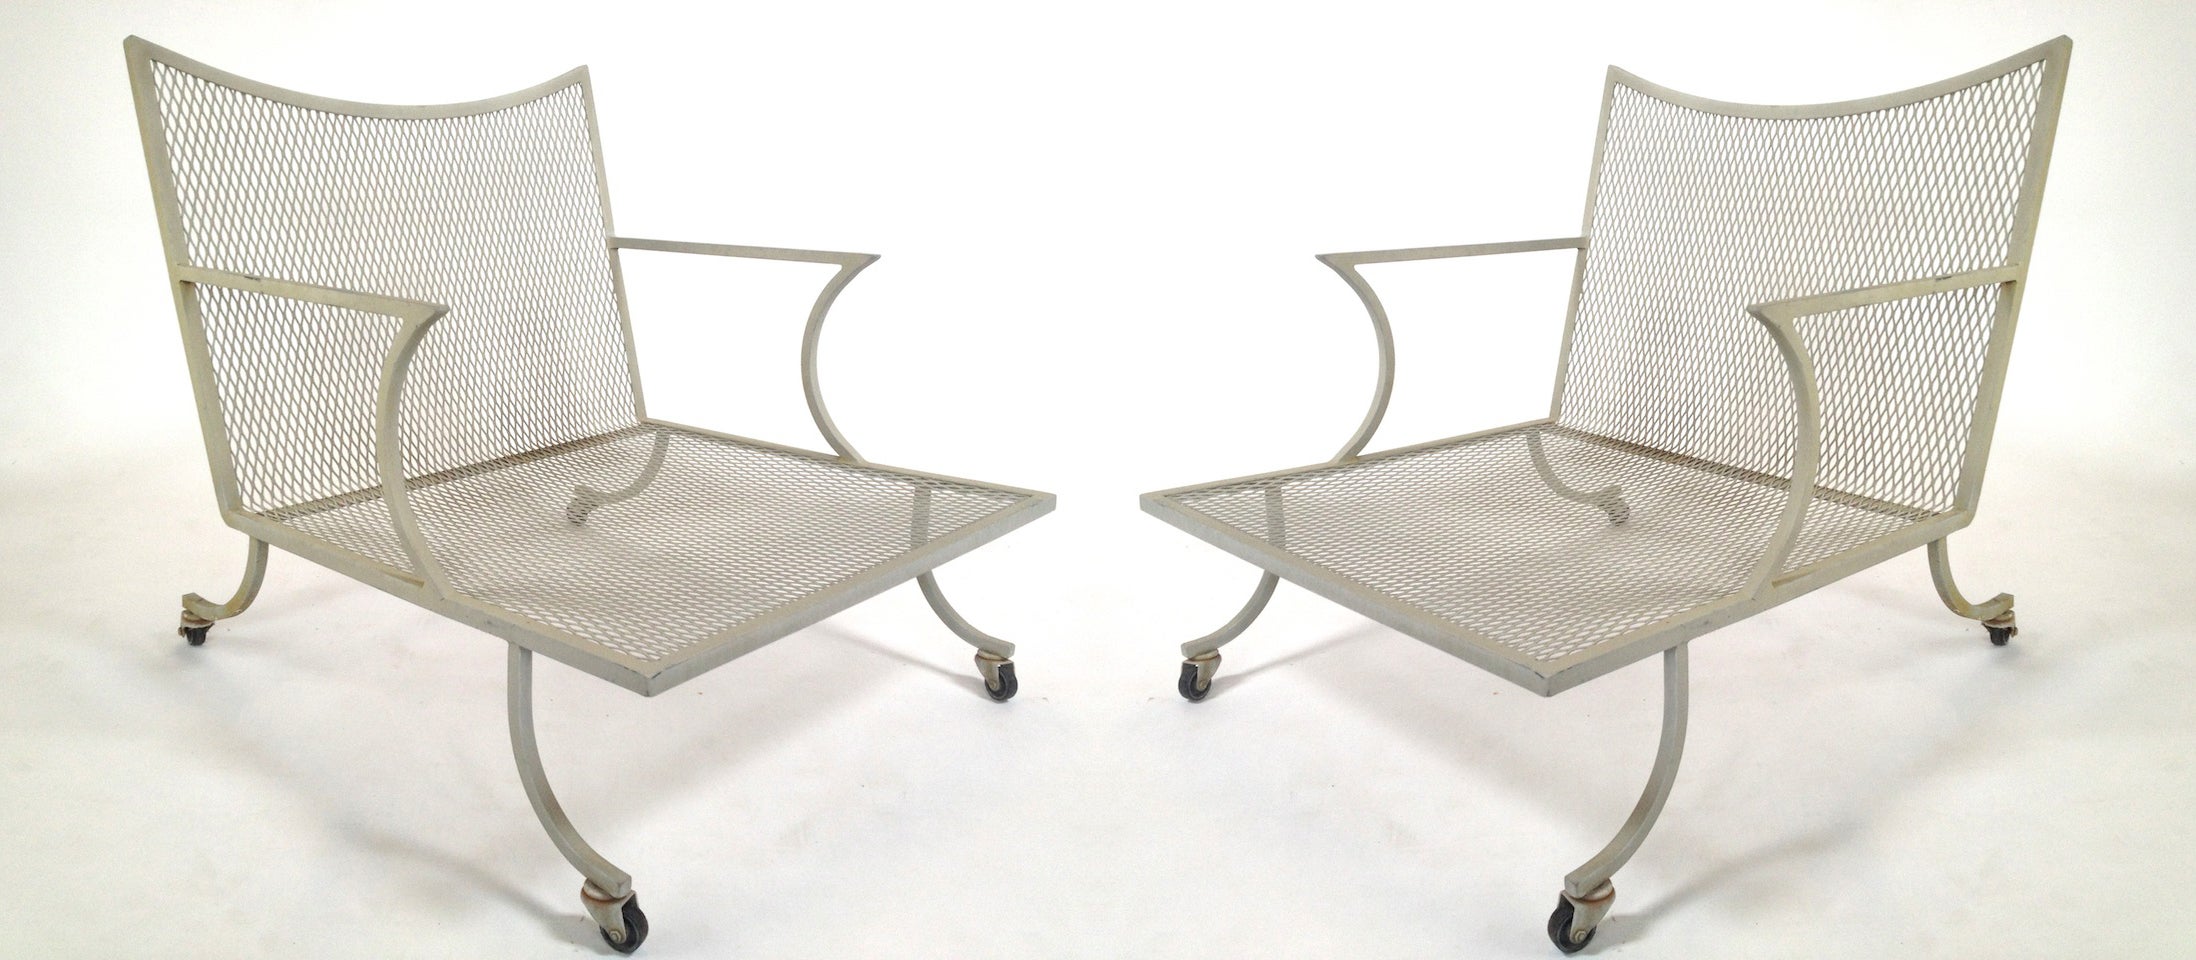 Exceptional Pair of Large and Low Patio Lounge Chairs on Casters by Bob Anderson